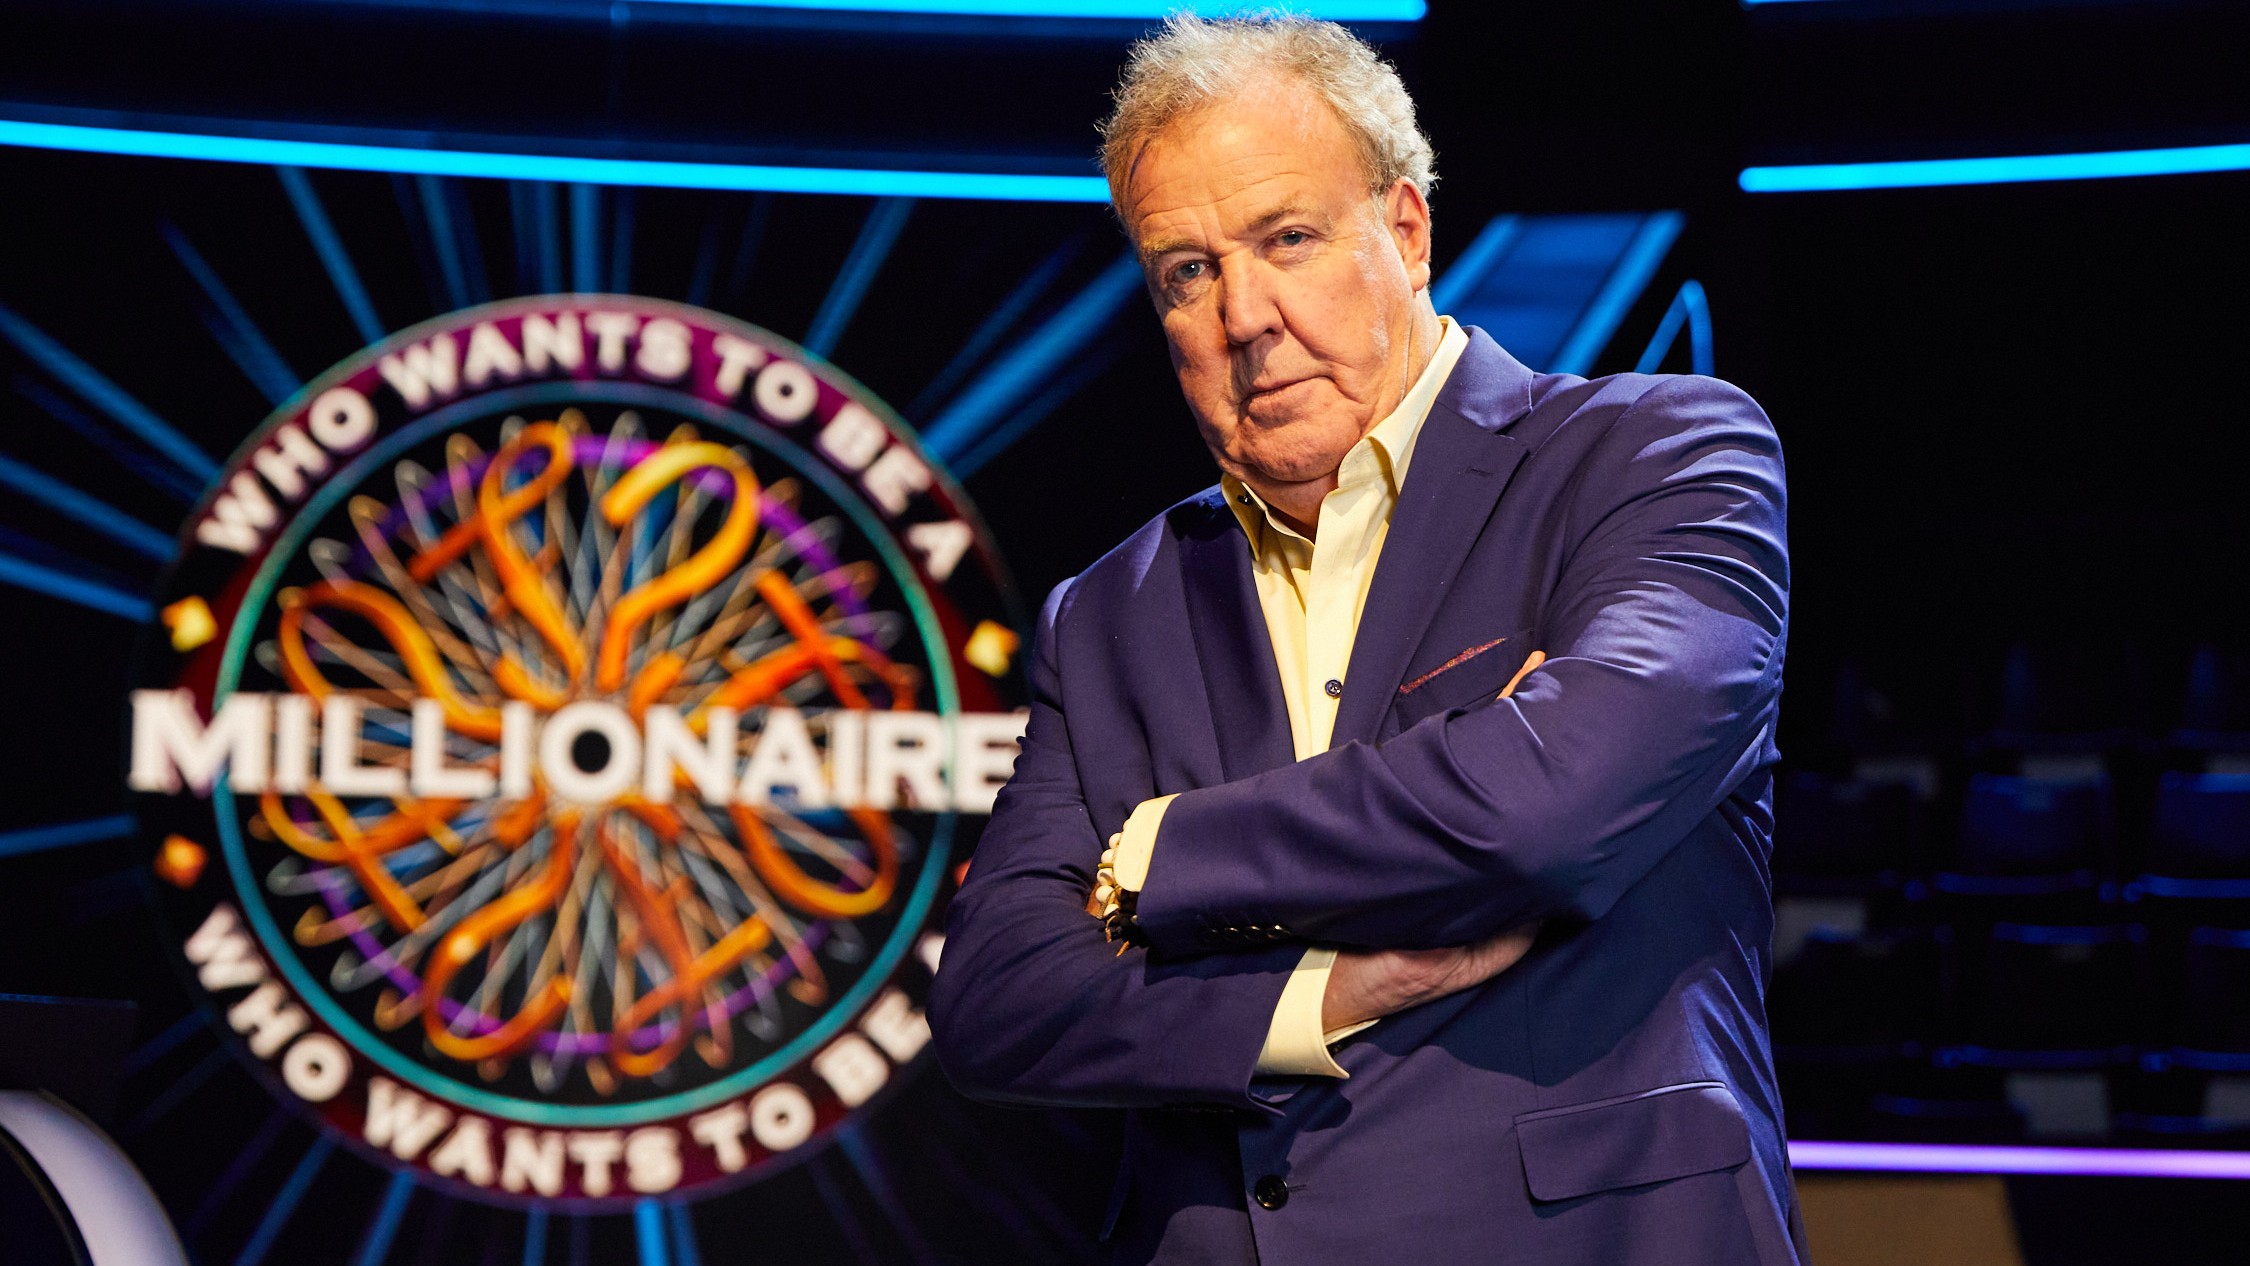 Who Wants To Be A Millionaire to return for 25th anniversary. All you need to know about the show that inspired KBC